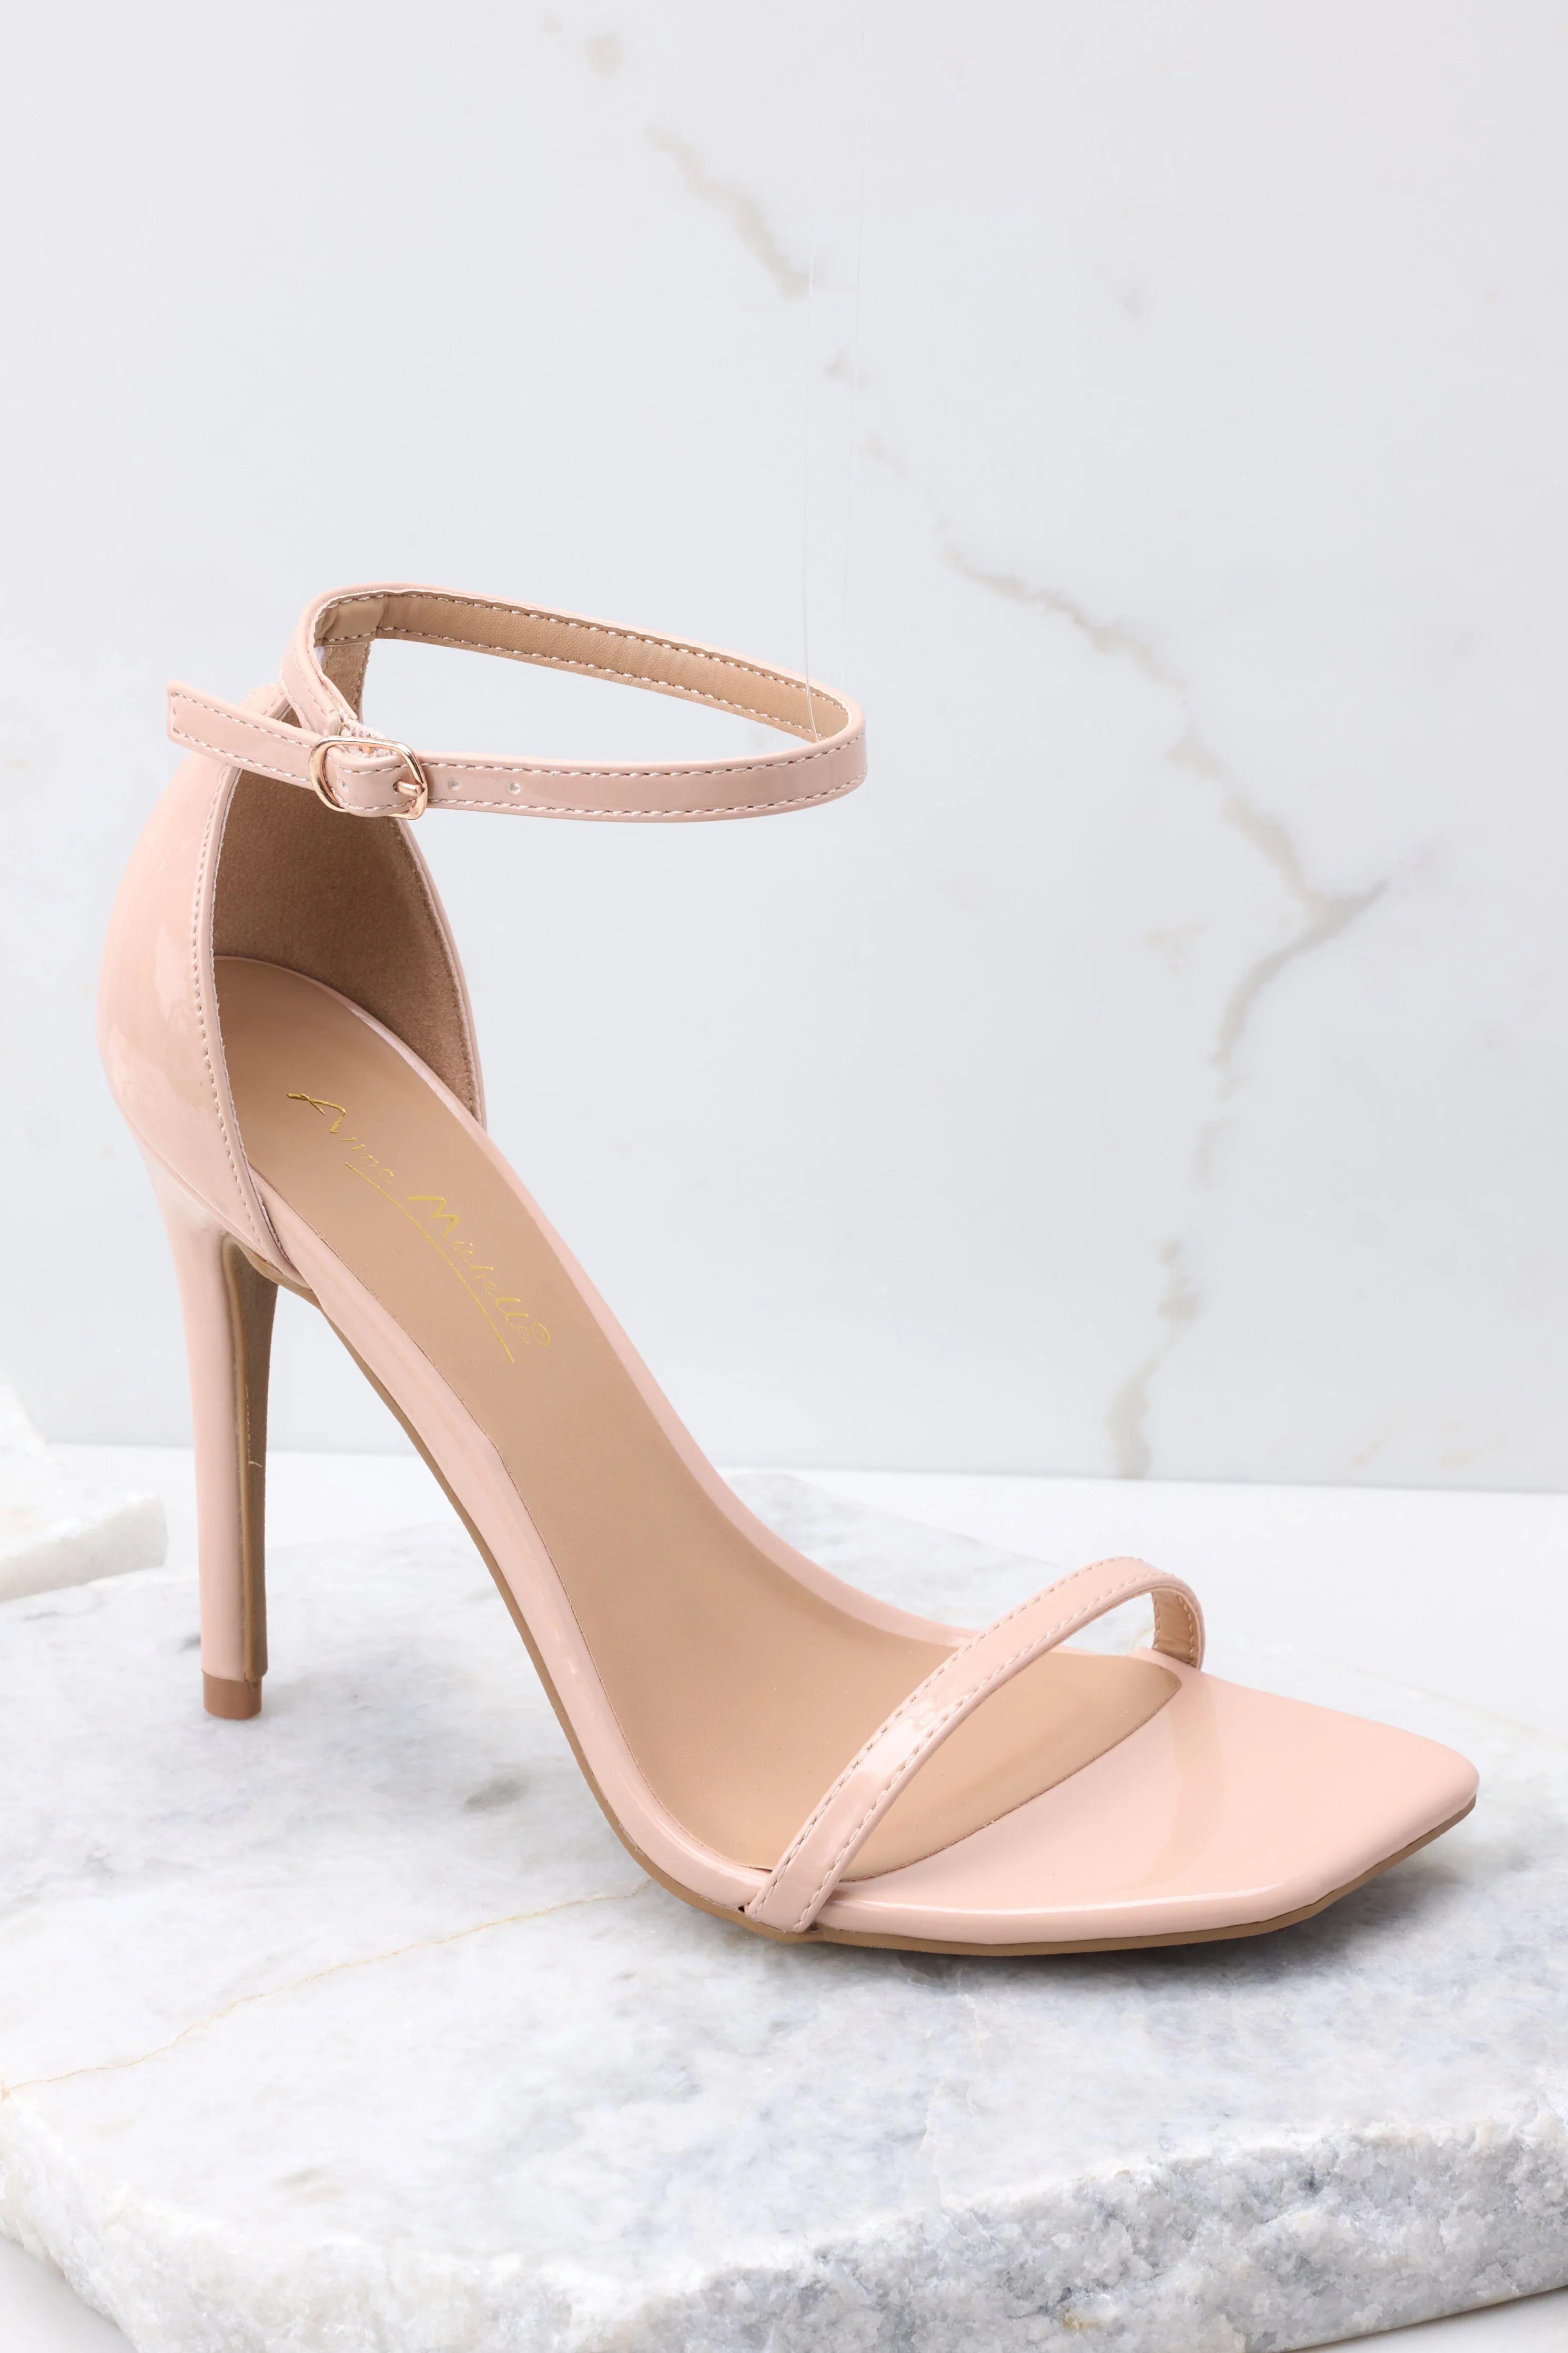 Walking Away Nude Patent Ankle Strap High Heel Sandals | Red Dress